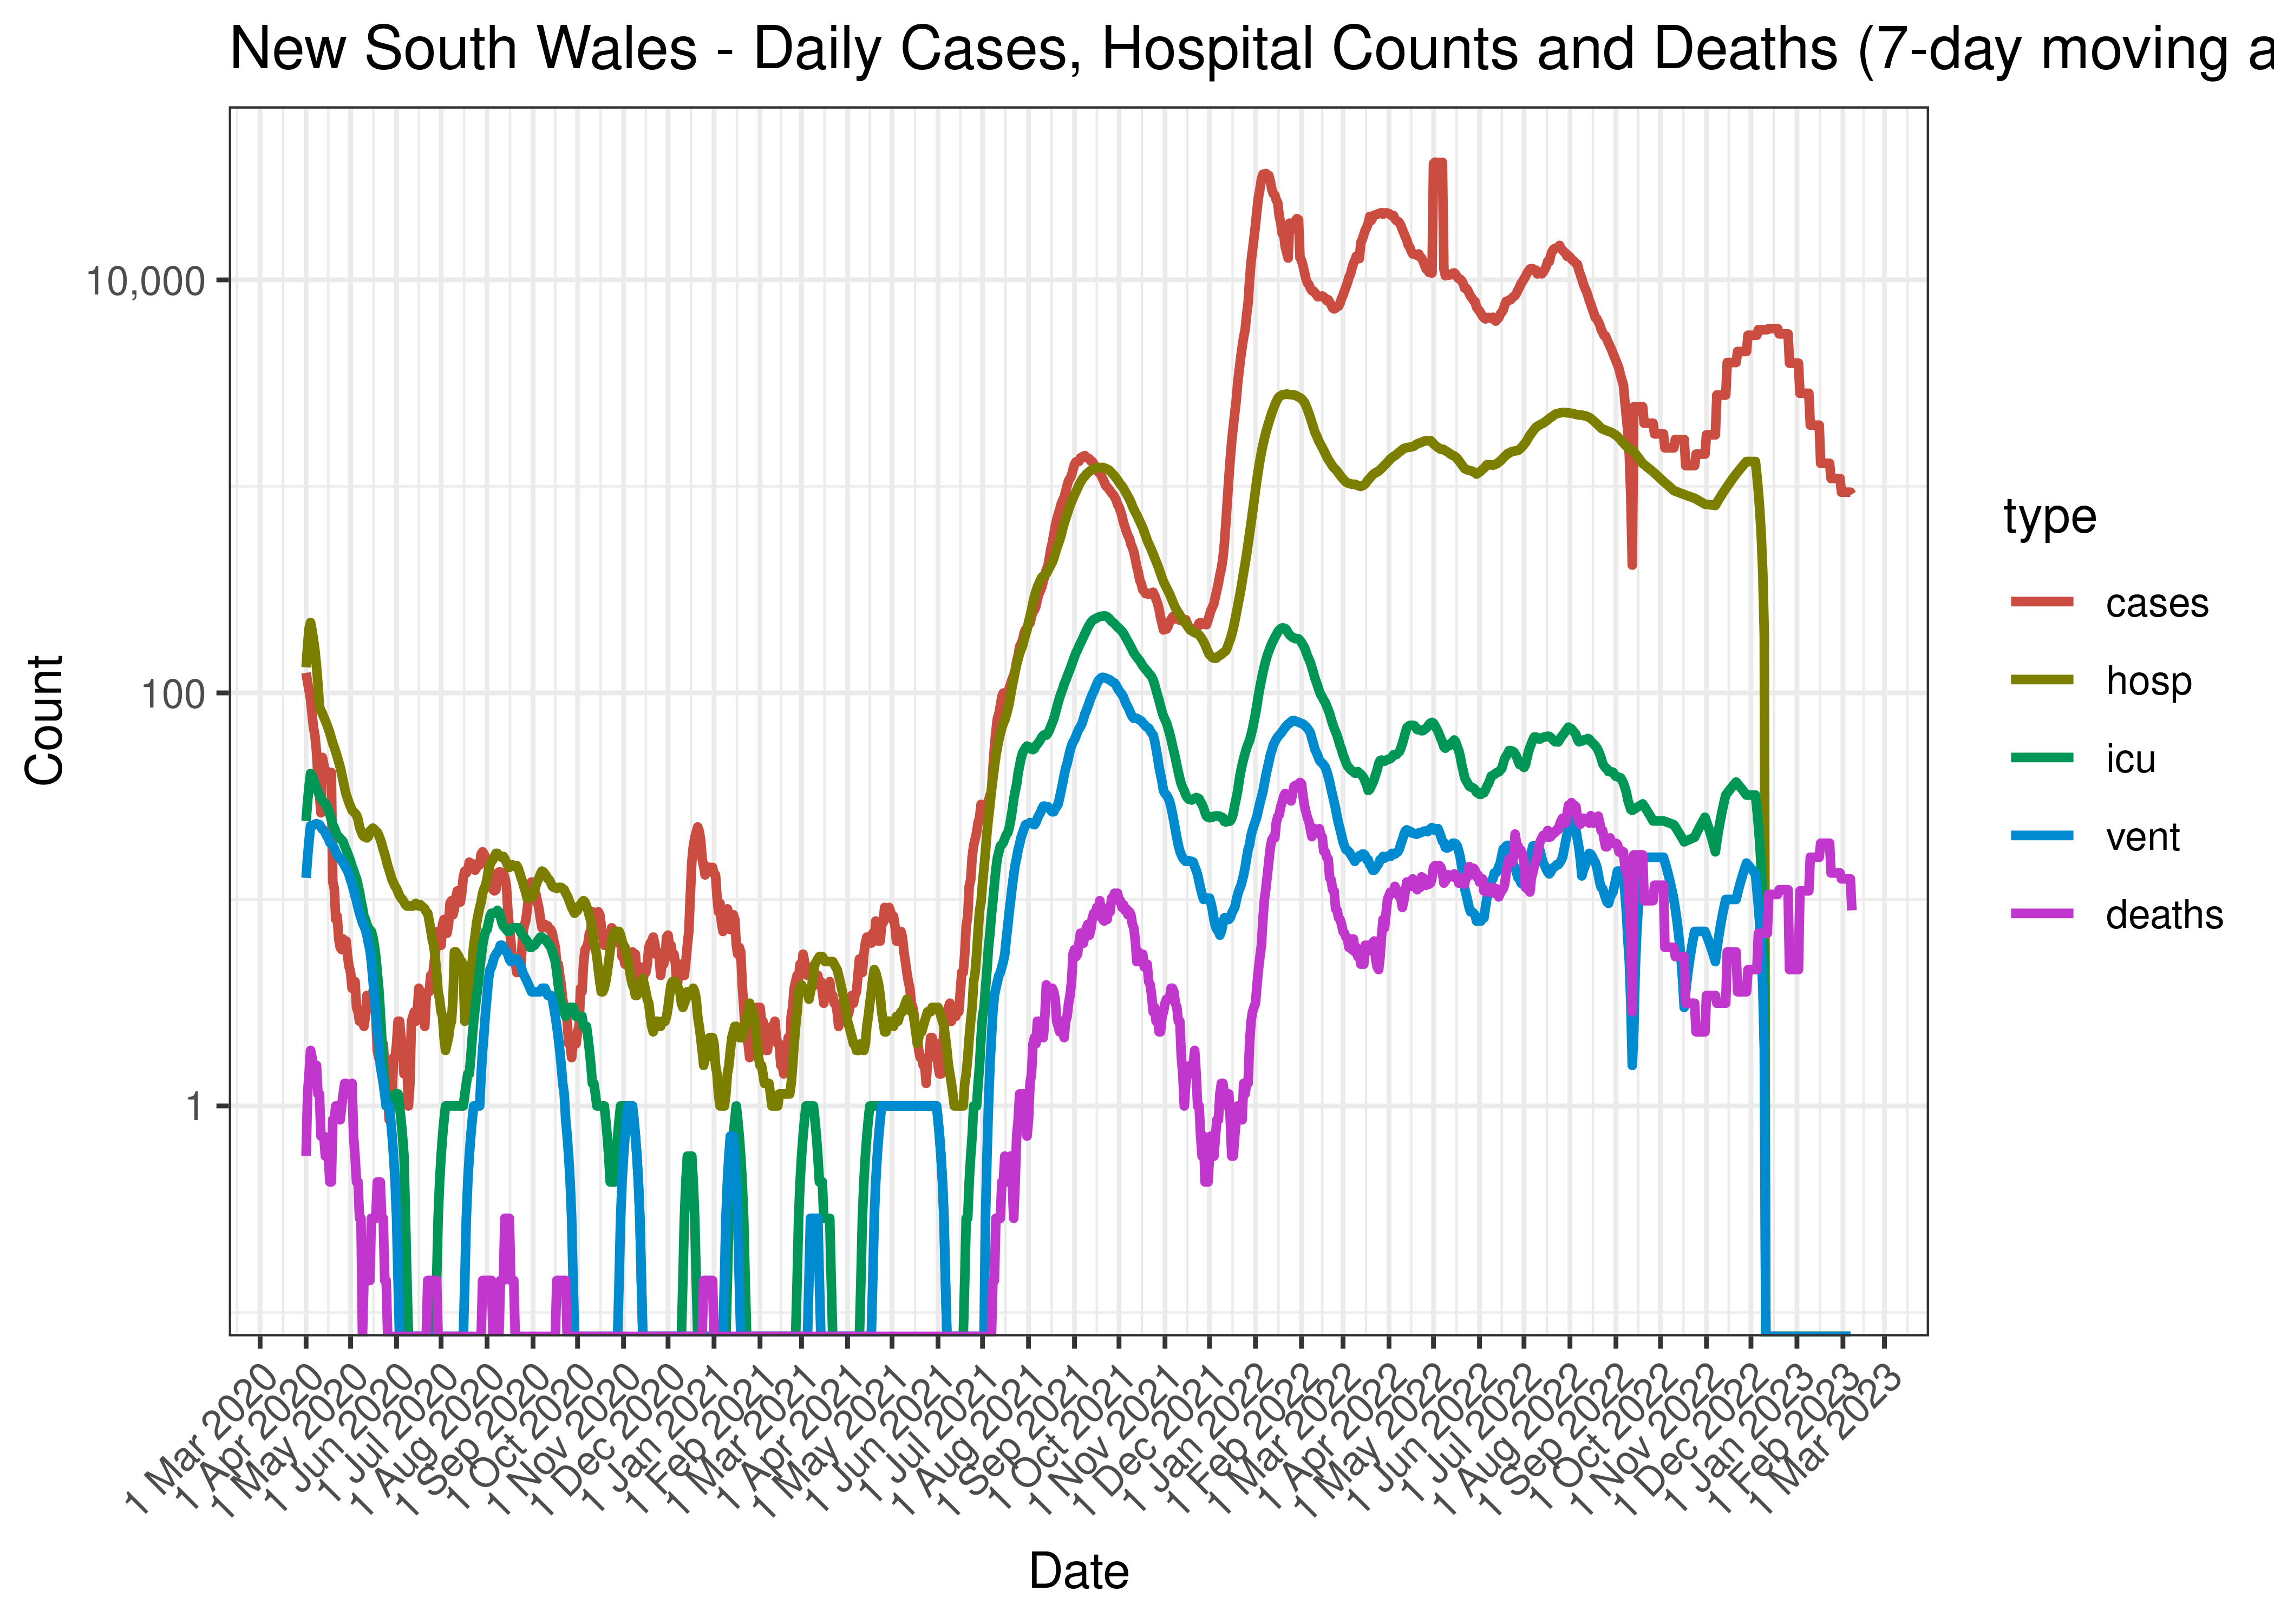 New South Wales - Daily Cases, Hospital Counts and Deaths (7-day moving average)